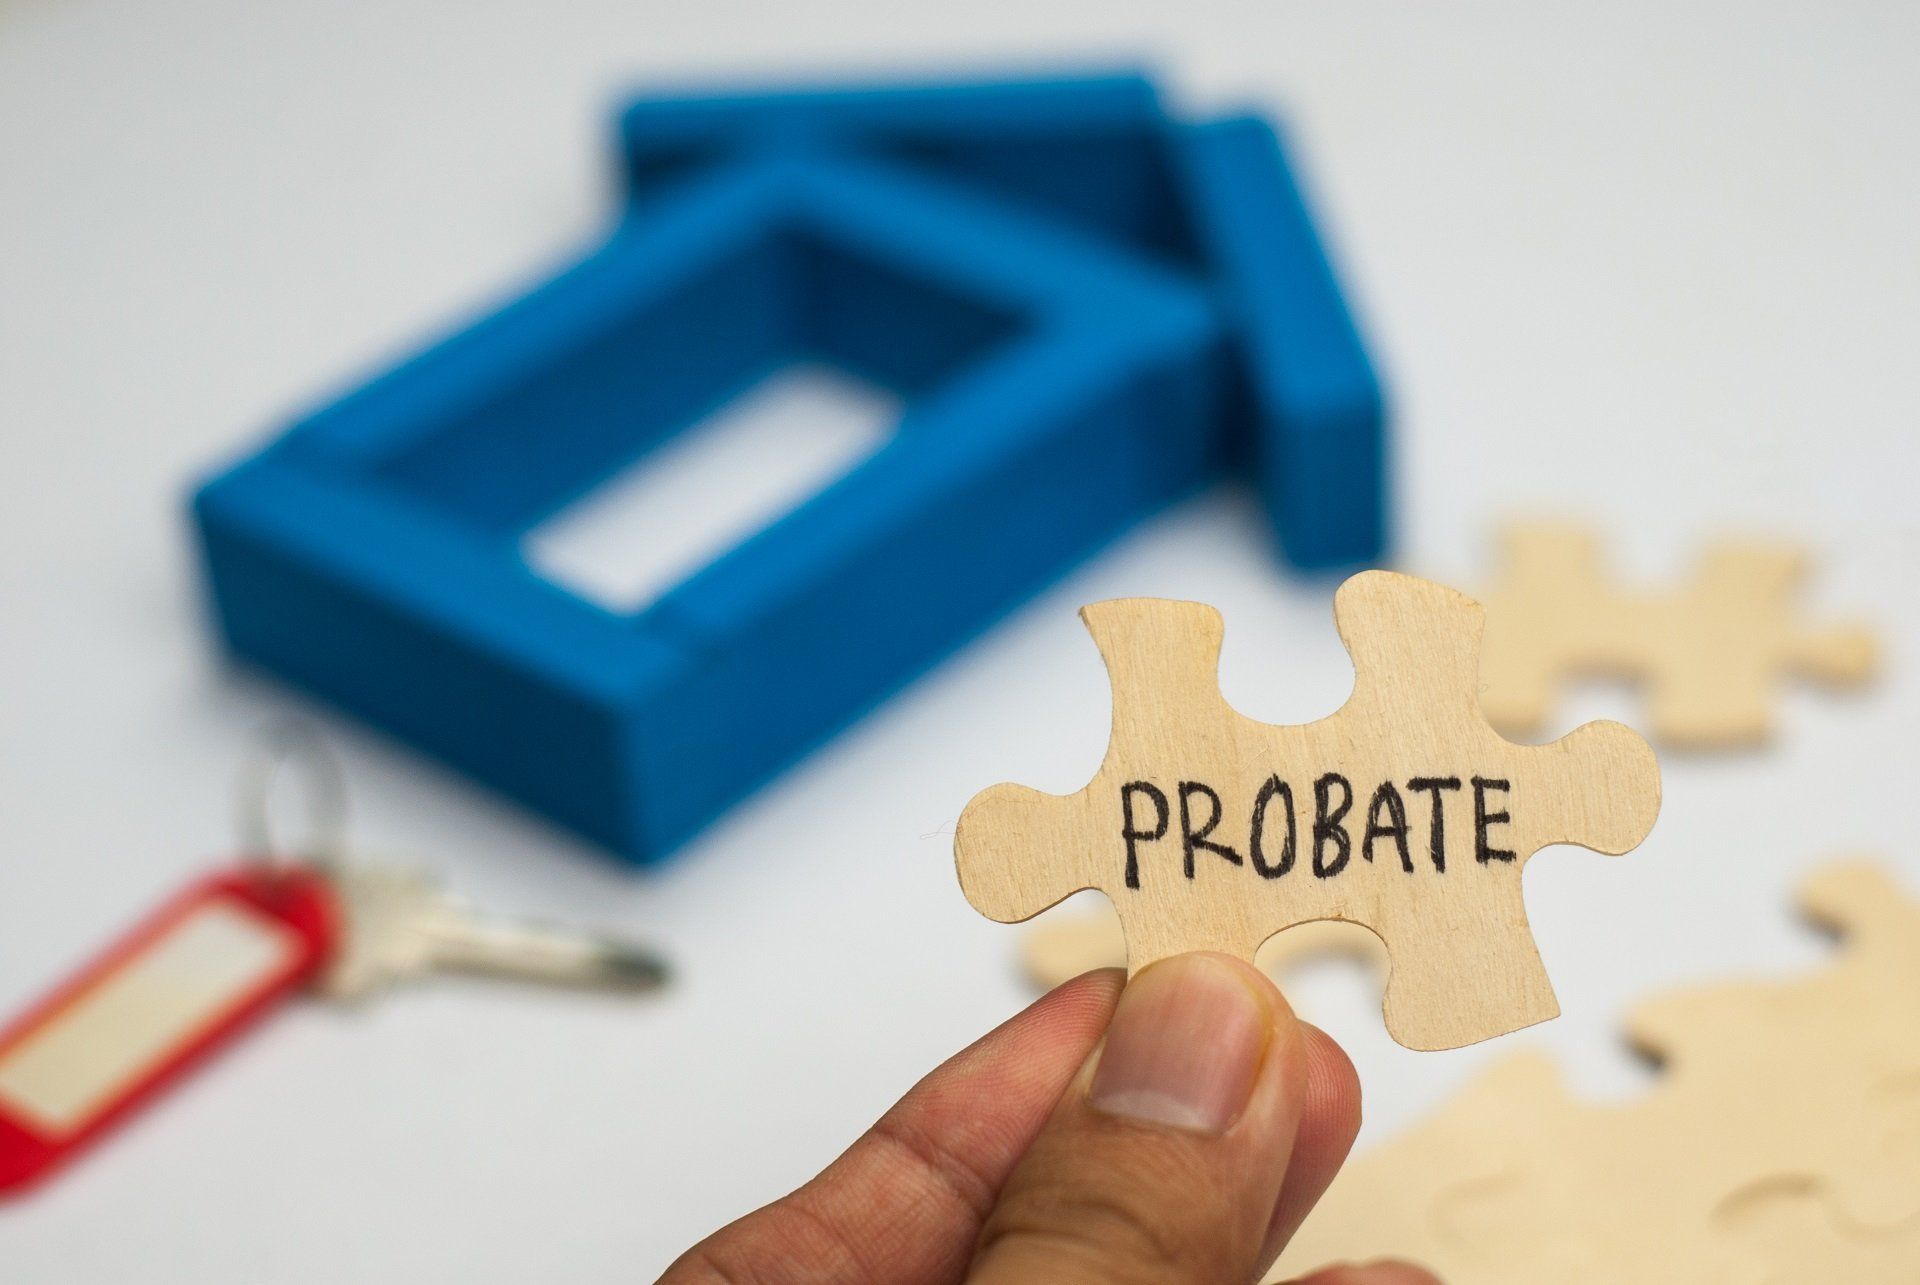 What Has to Go Through Probate in Florida?